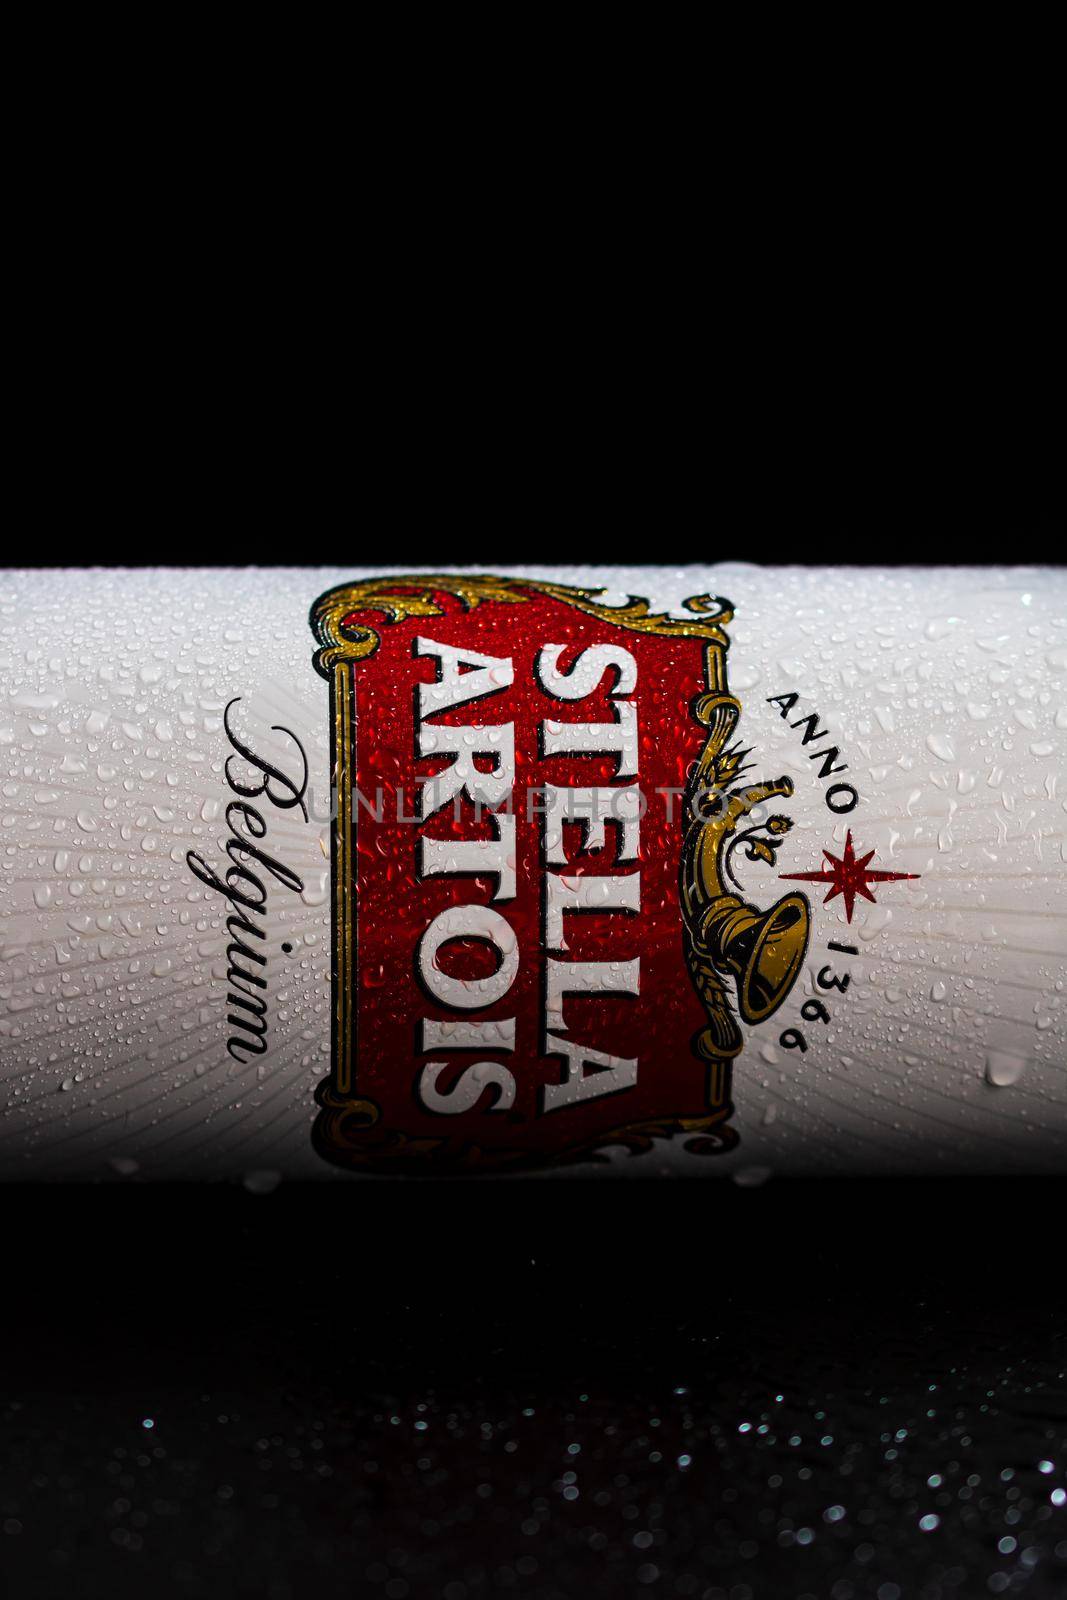 Condensation water droplets on Stella Artois beer can isolated on black. Bucharest, Romania, 2020 by vladispas